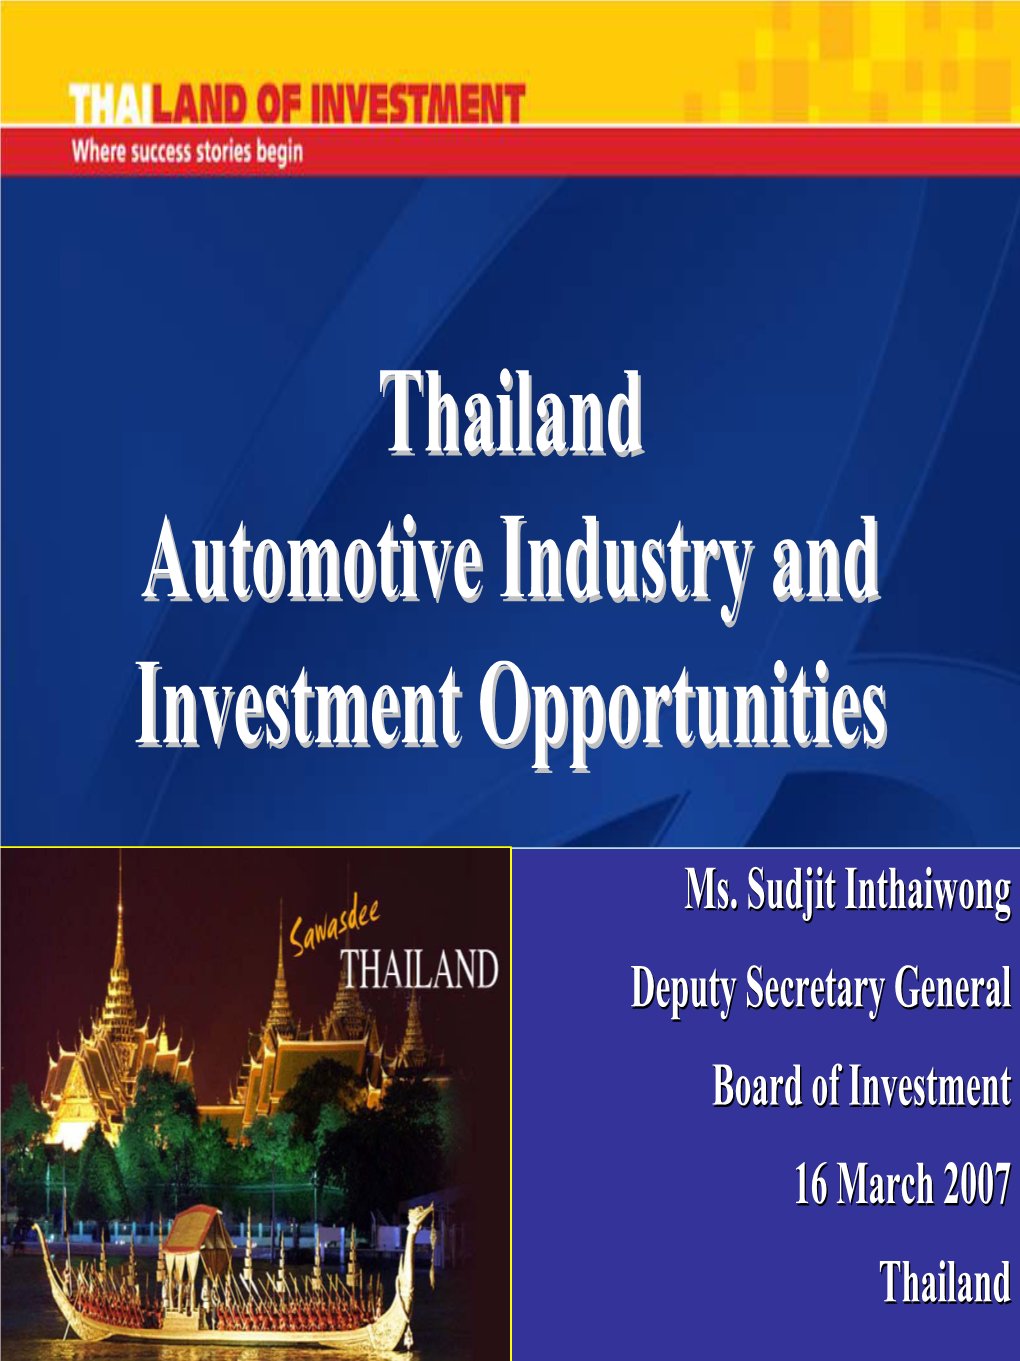 Thailand Automotive Industry and Investment Opportunities